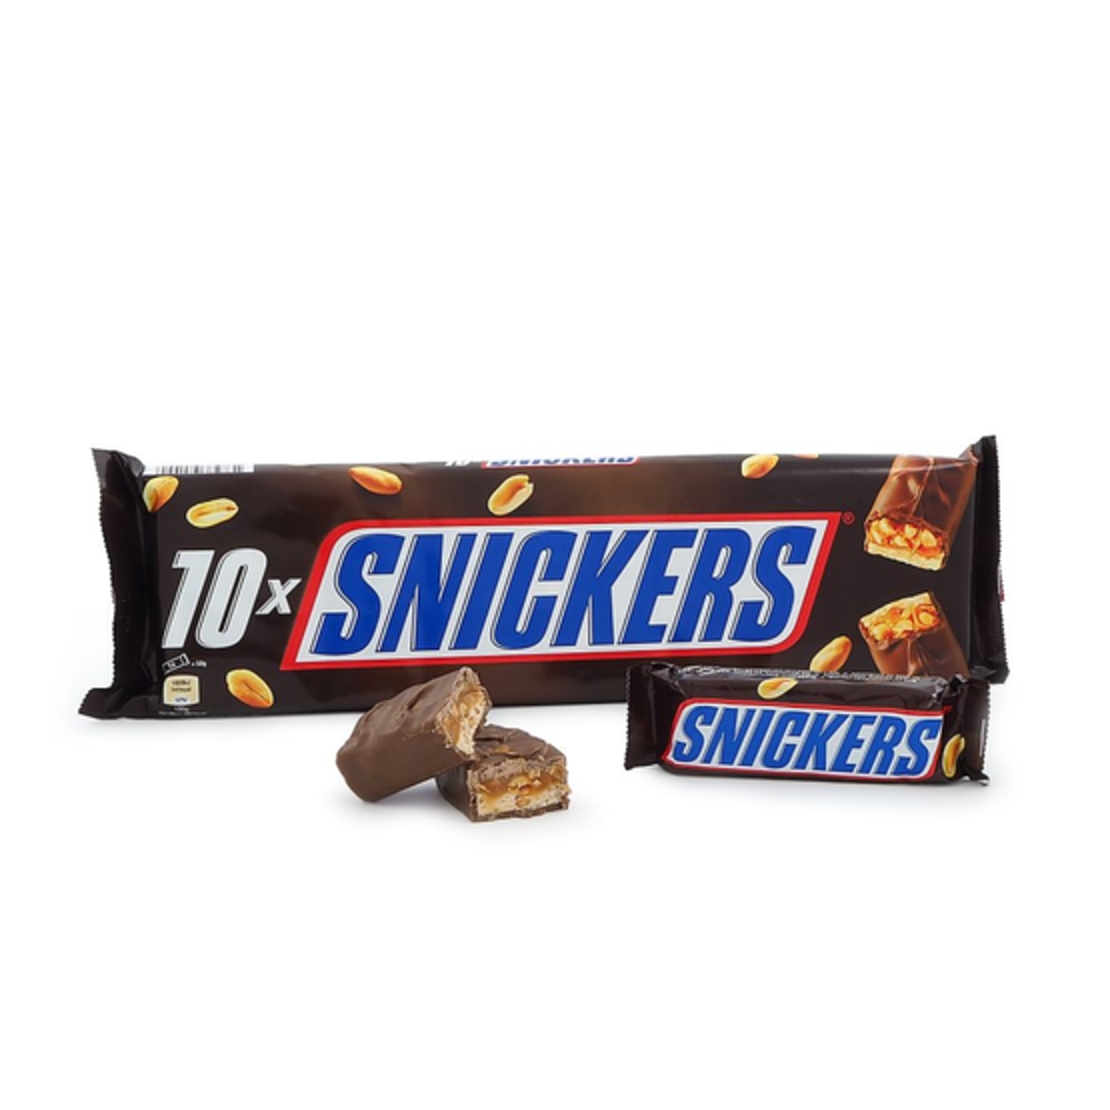 Snickers x10  50g